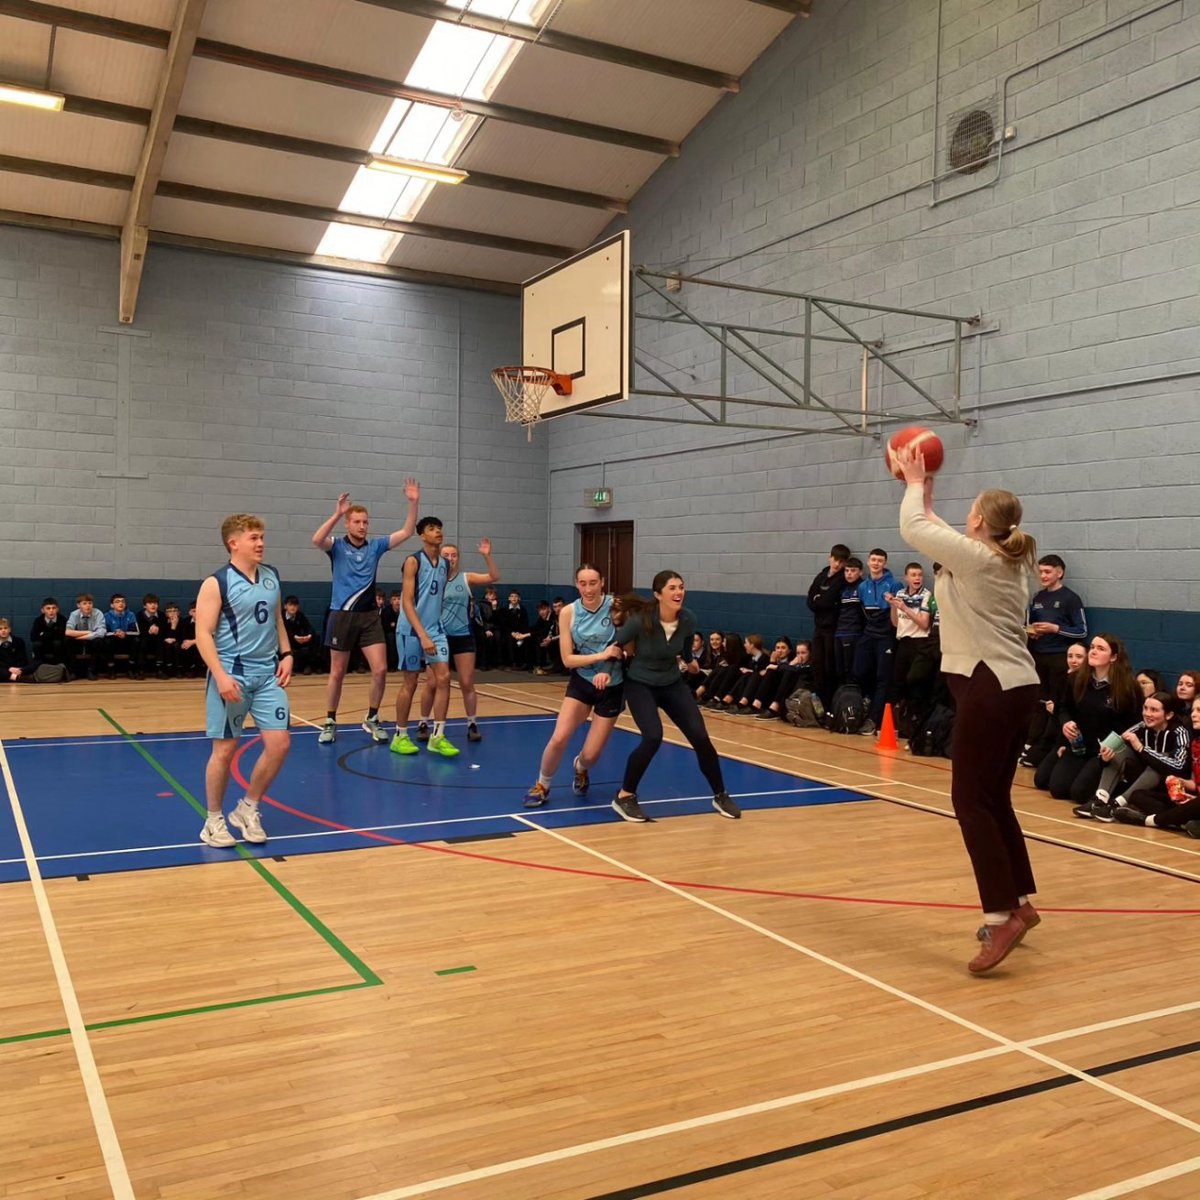 Bringing our Active Week to a close the annual Teachers v Students Basketball match. Teachers showing the students how it's done on the court 🏀 Extra time, extra victory! #ActiveWeek